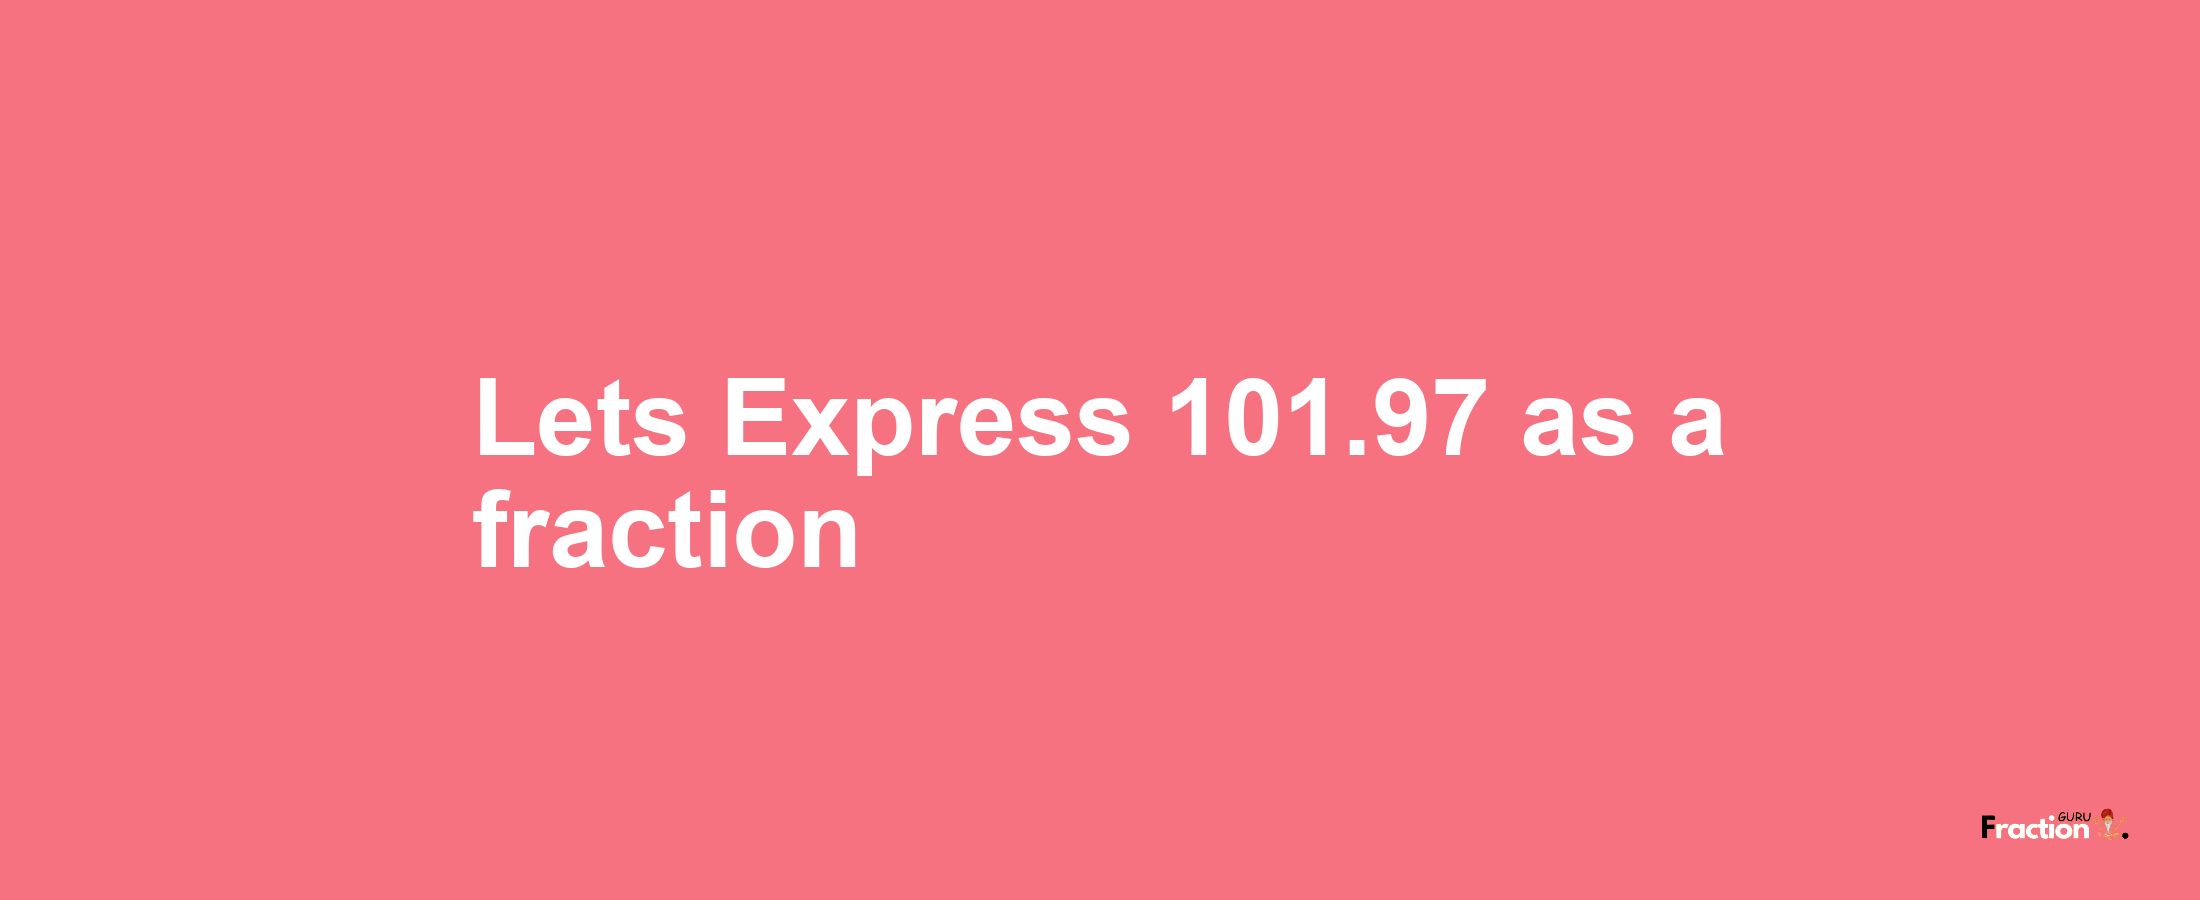 Lets Express 101.97 as afraction